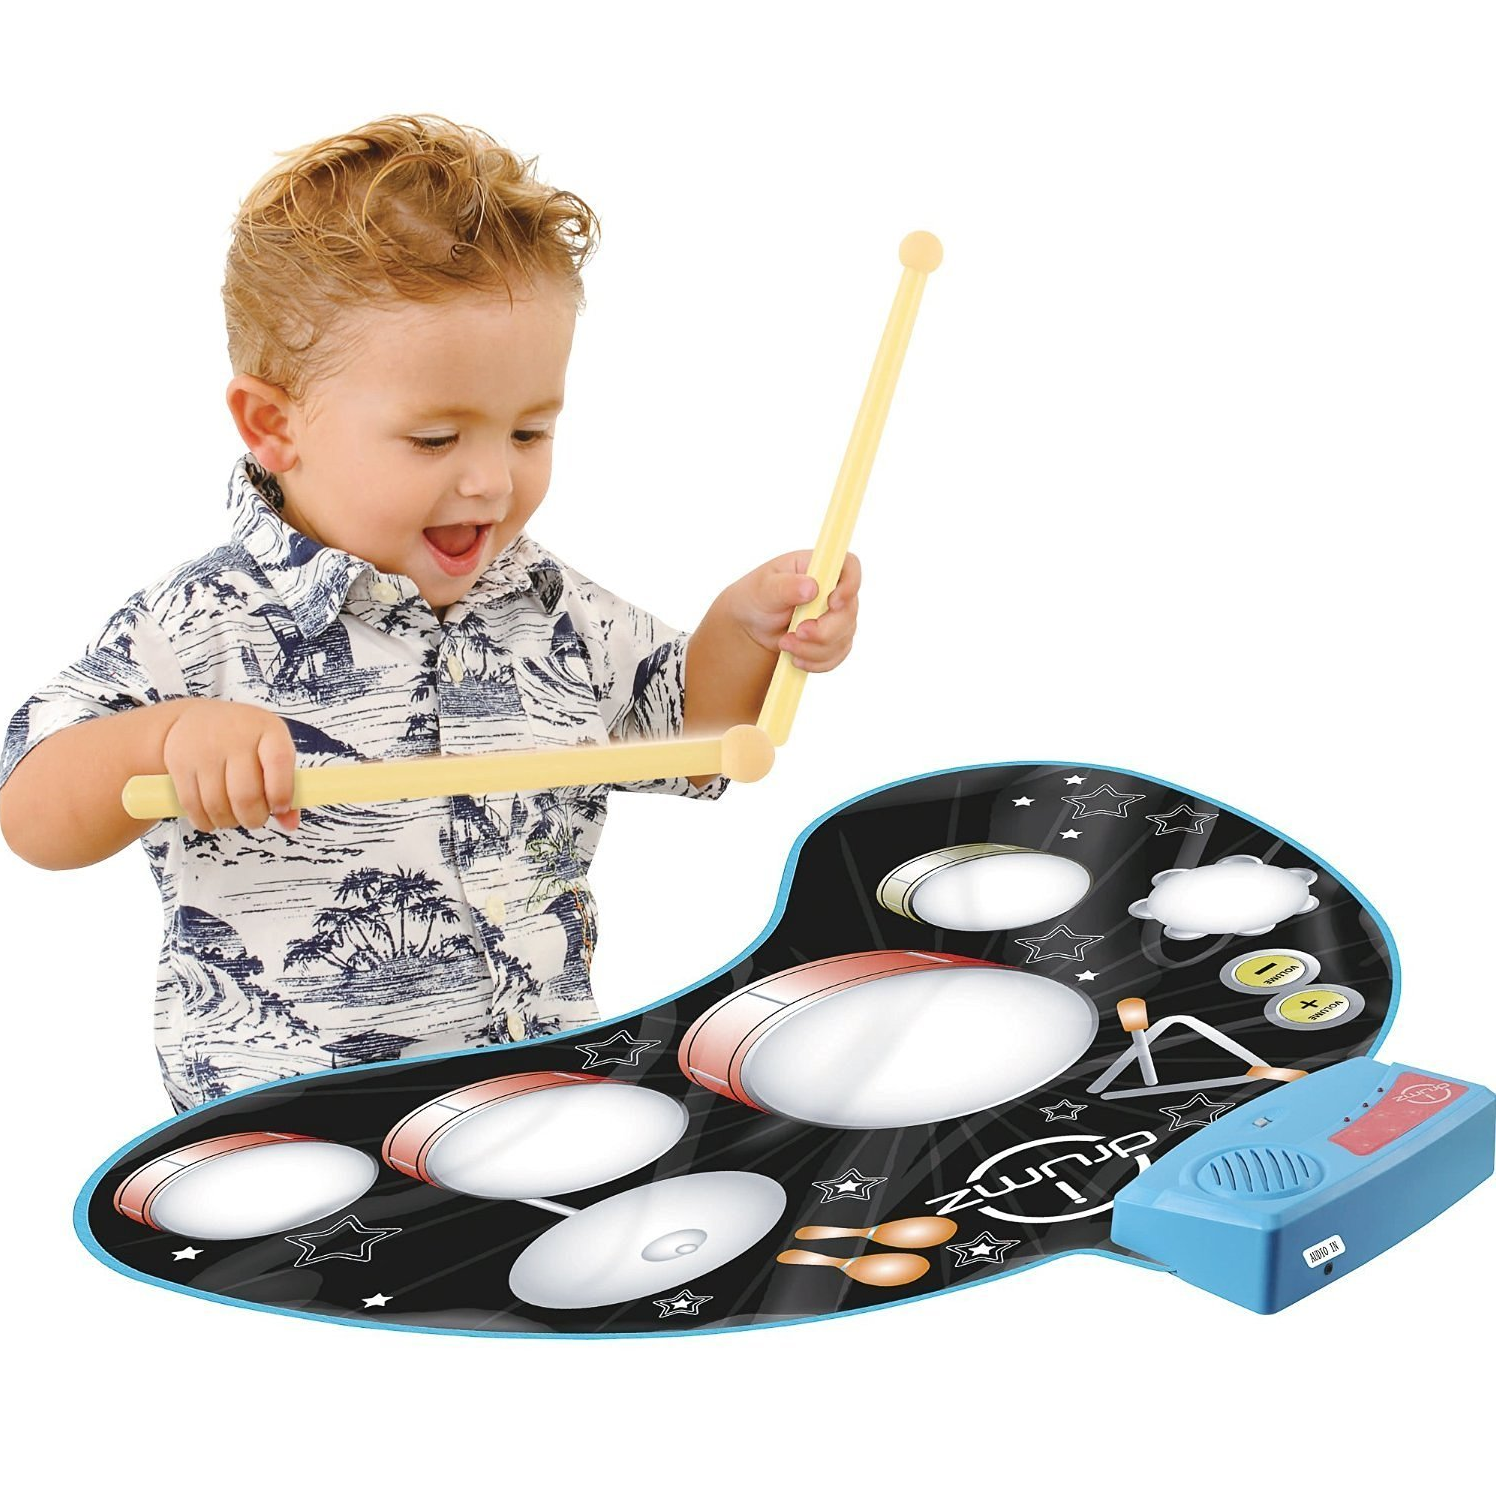 Click N Play Kids Electronic Touch Sensitive Play Mat Drum Set with Read Drum Sounds Only $19.99!